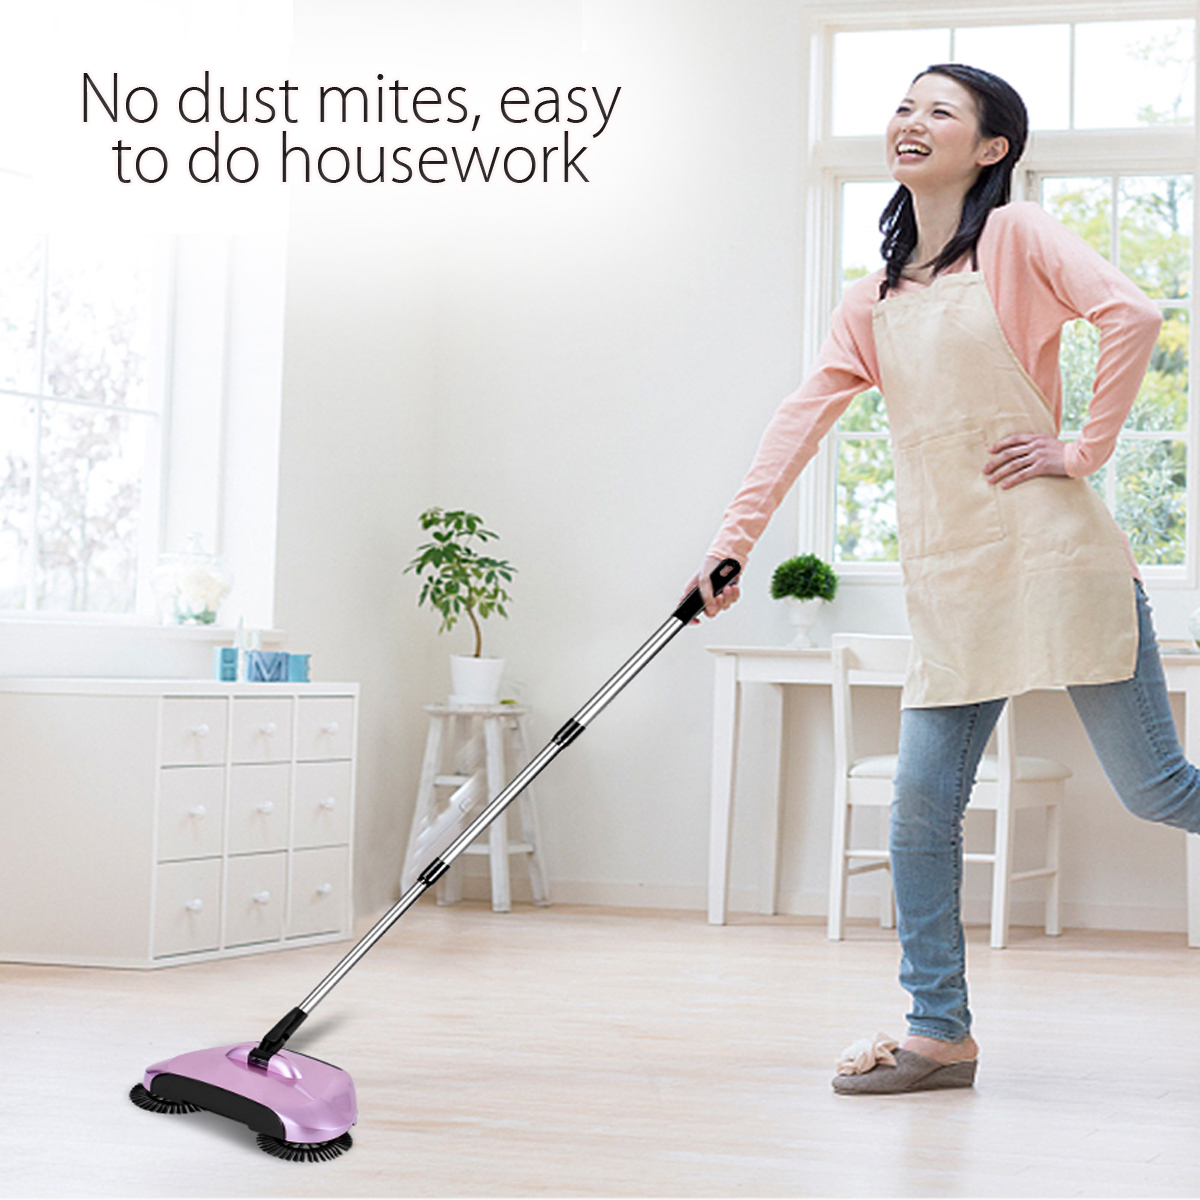 Lazy-Automatic-Hand-Push-Sweeper-Broom-Household-Cleaning-Without-Electricity-1158778